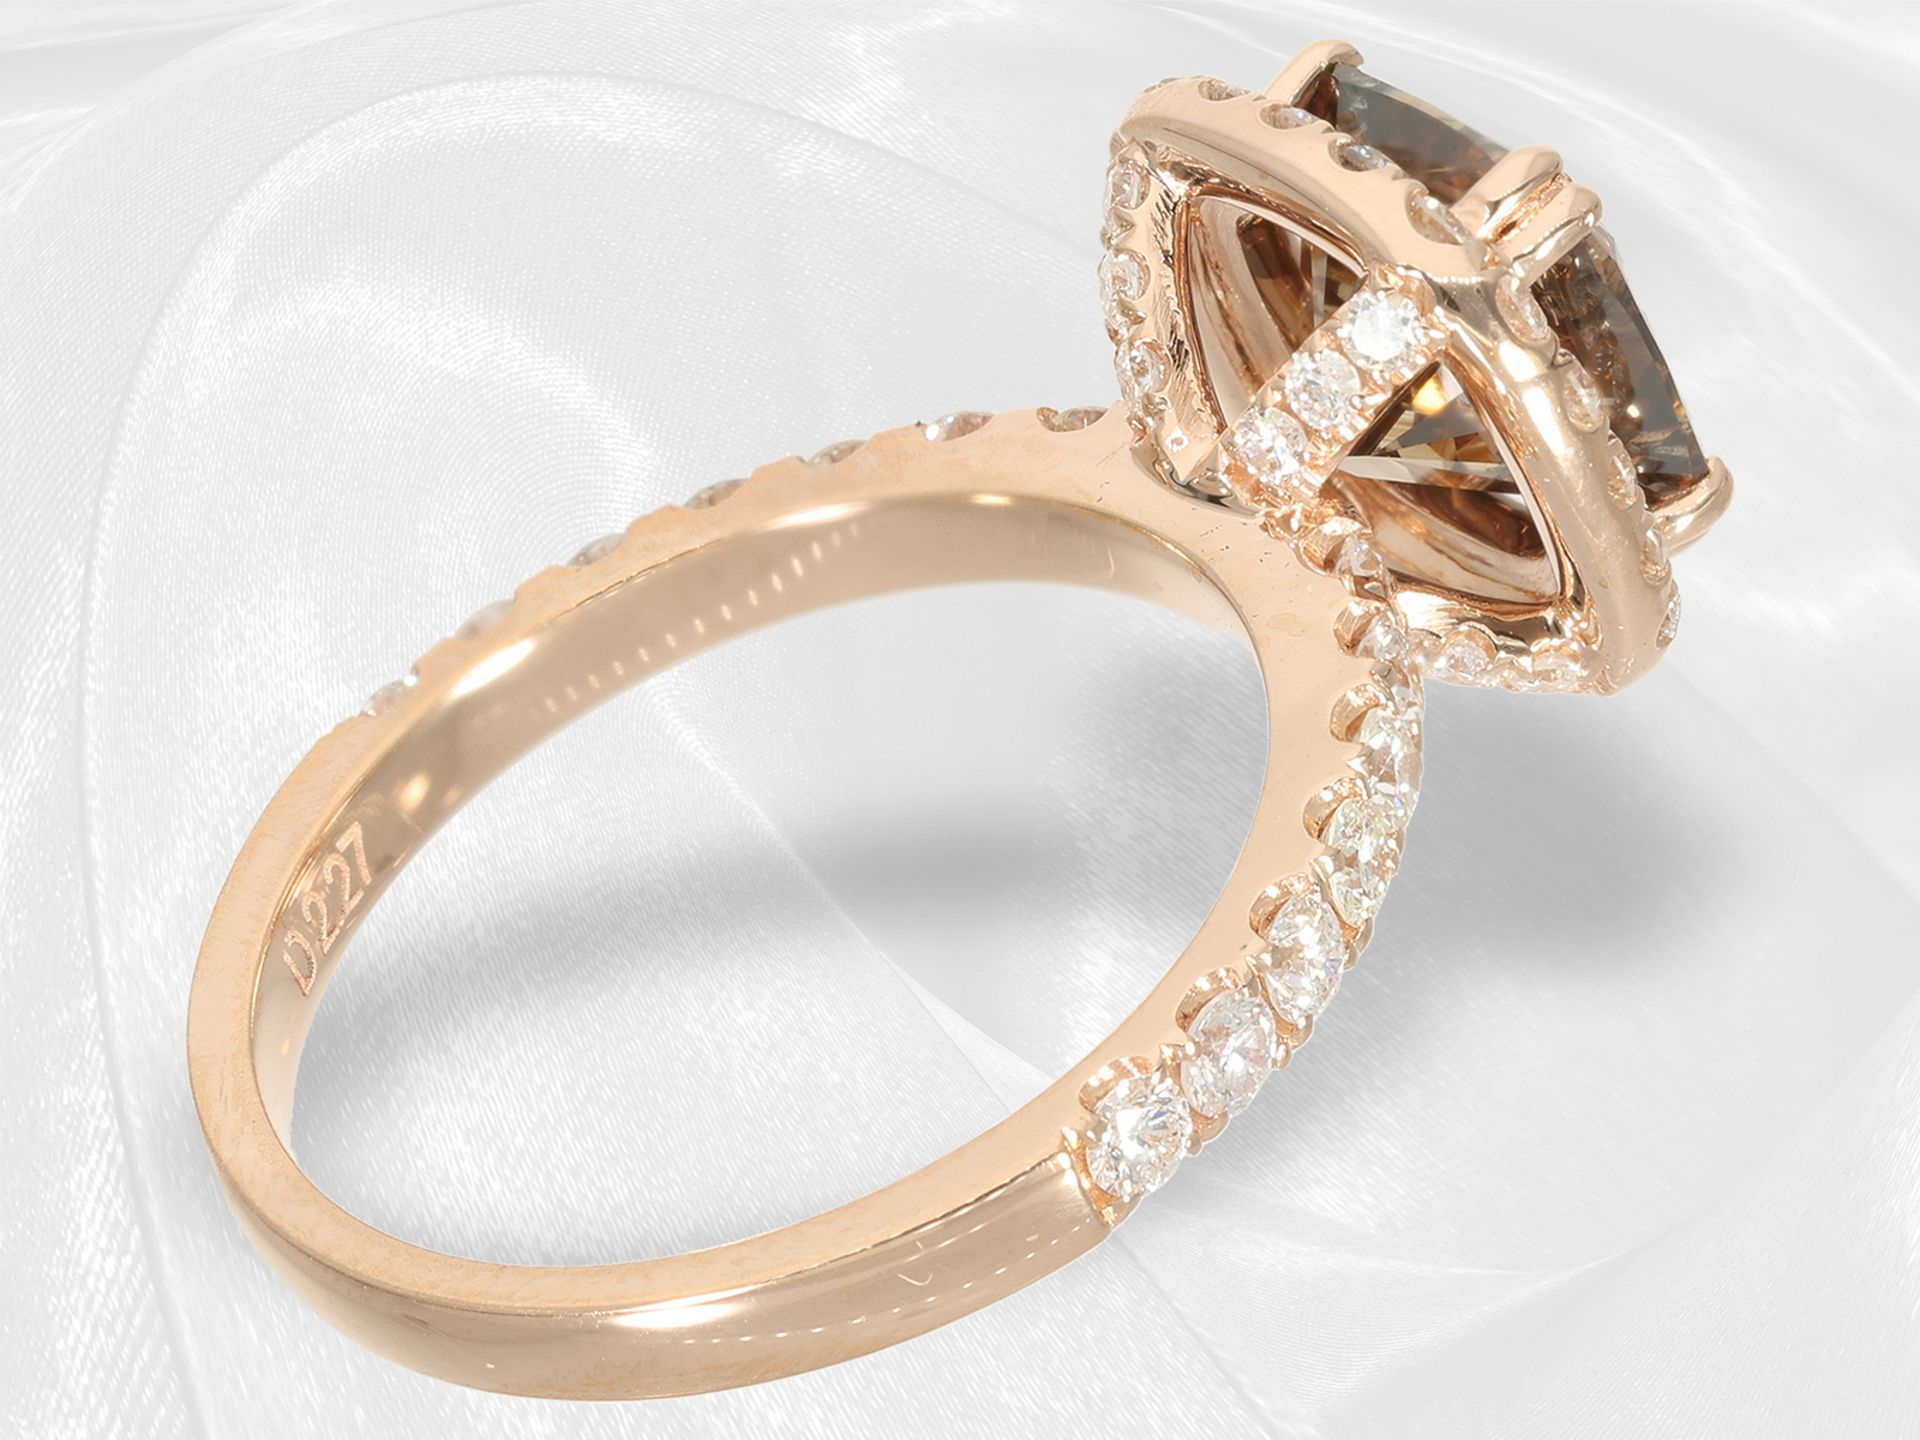 Interesting high carat pink gold ring with white and a fancy brilliant-cut diamond of 2.28ct, unworn - Image 6 of 7